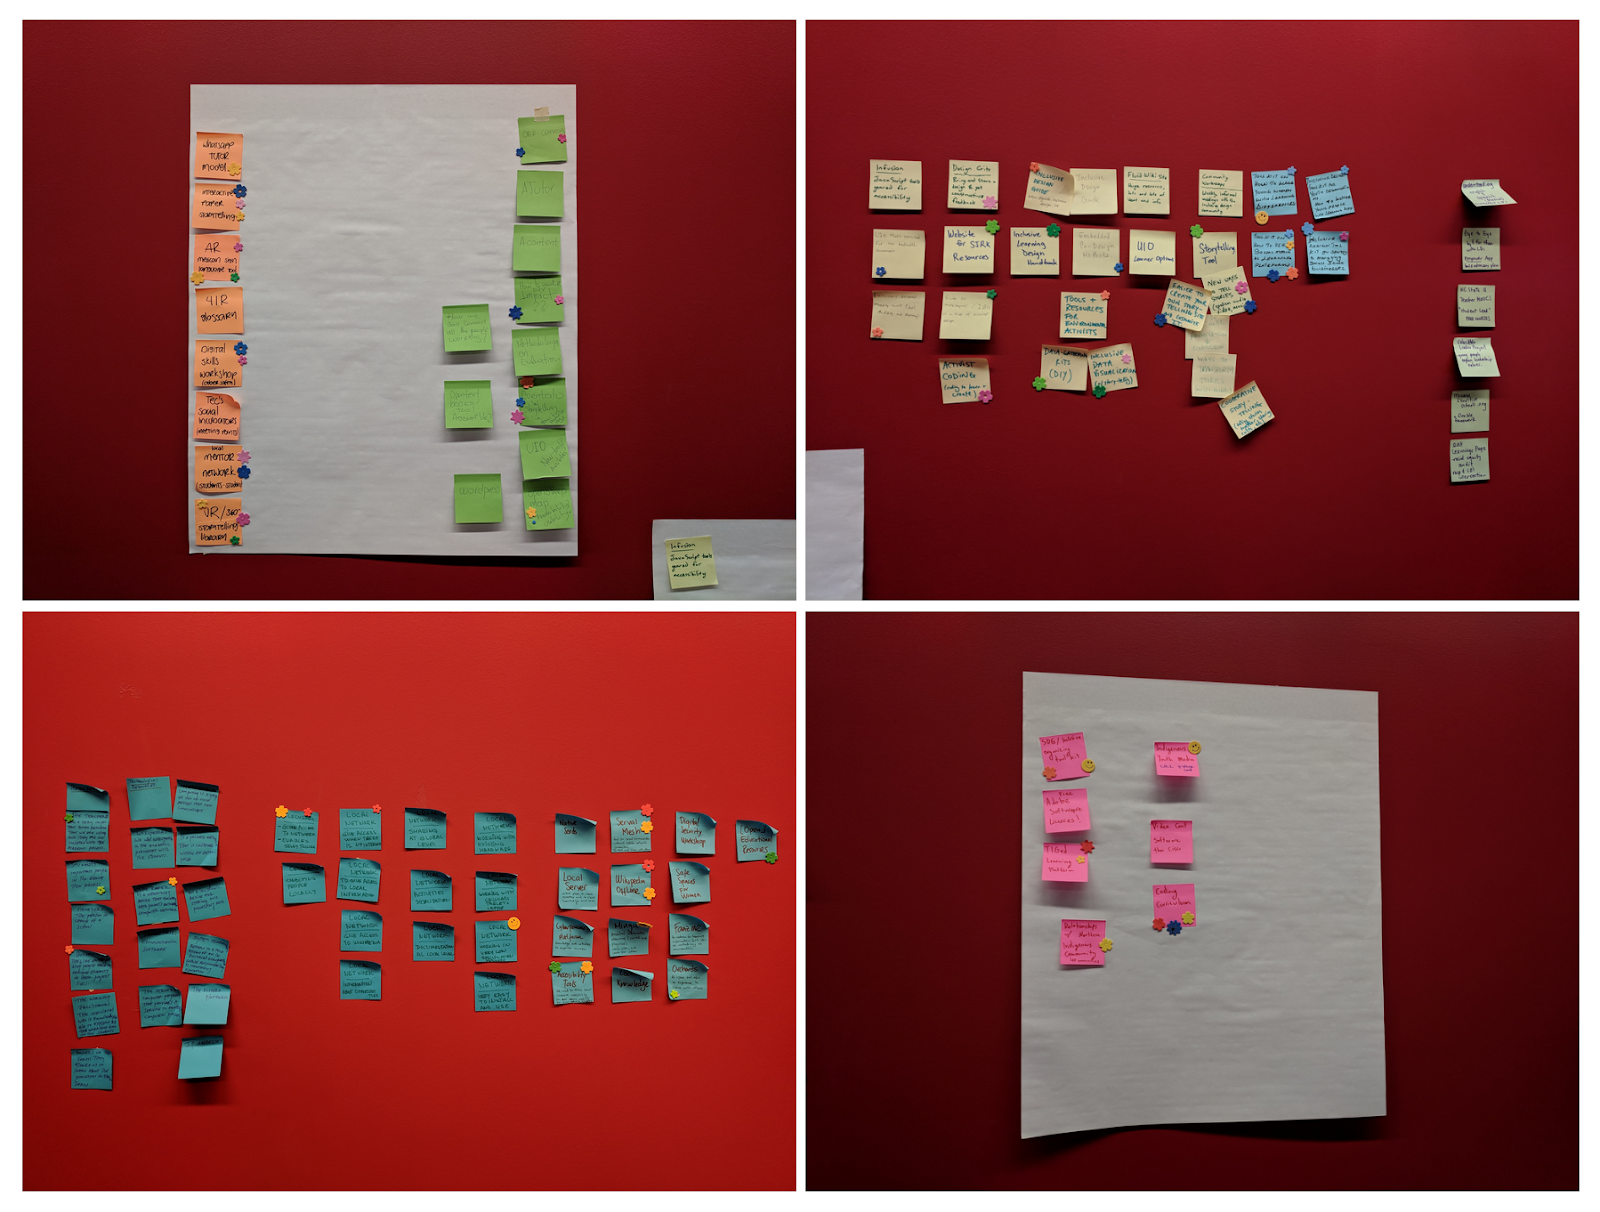 Many brightly coloured sticky notes on a red wall. There is writing on the sticky notes but it’s not legible. 